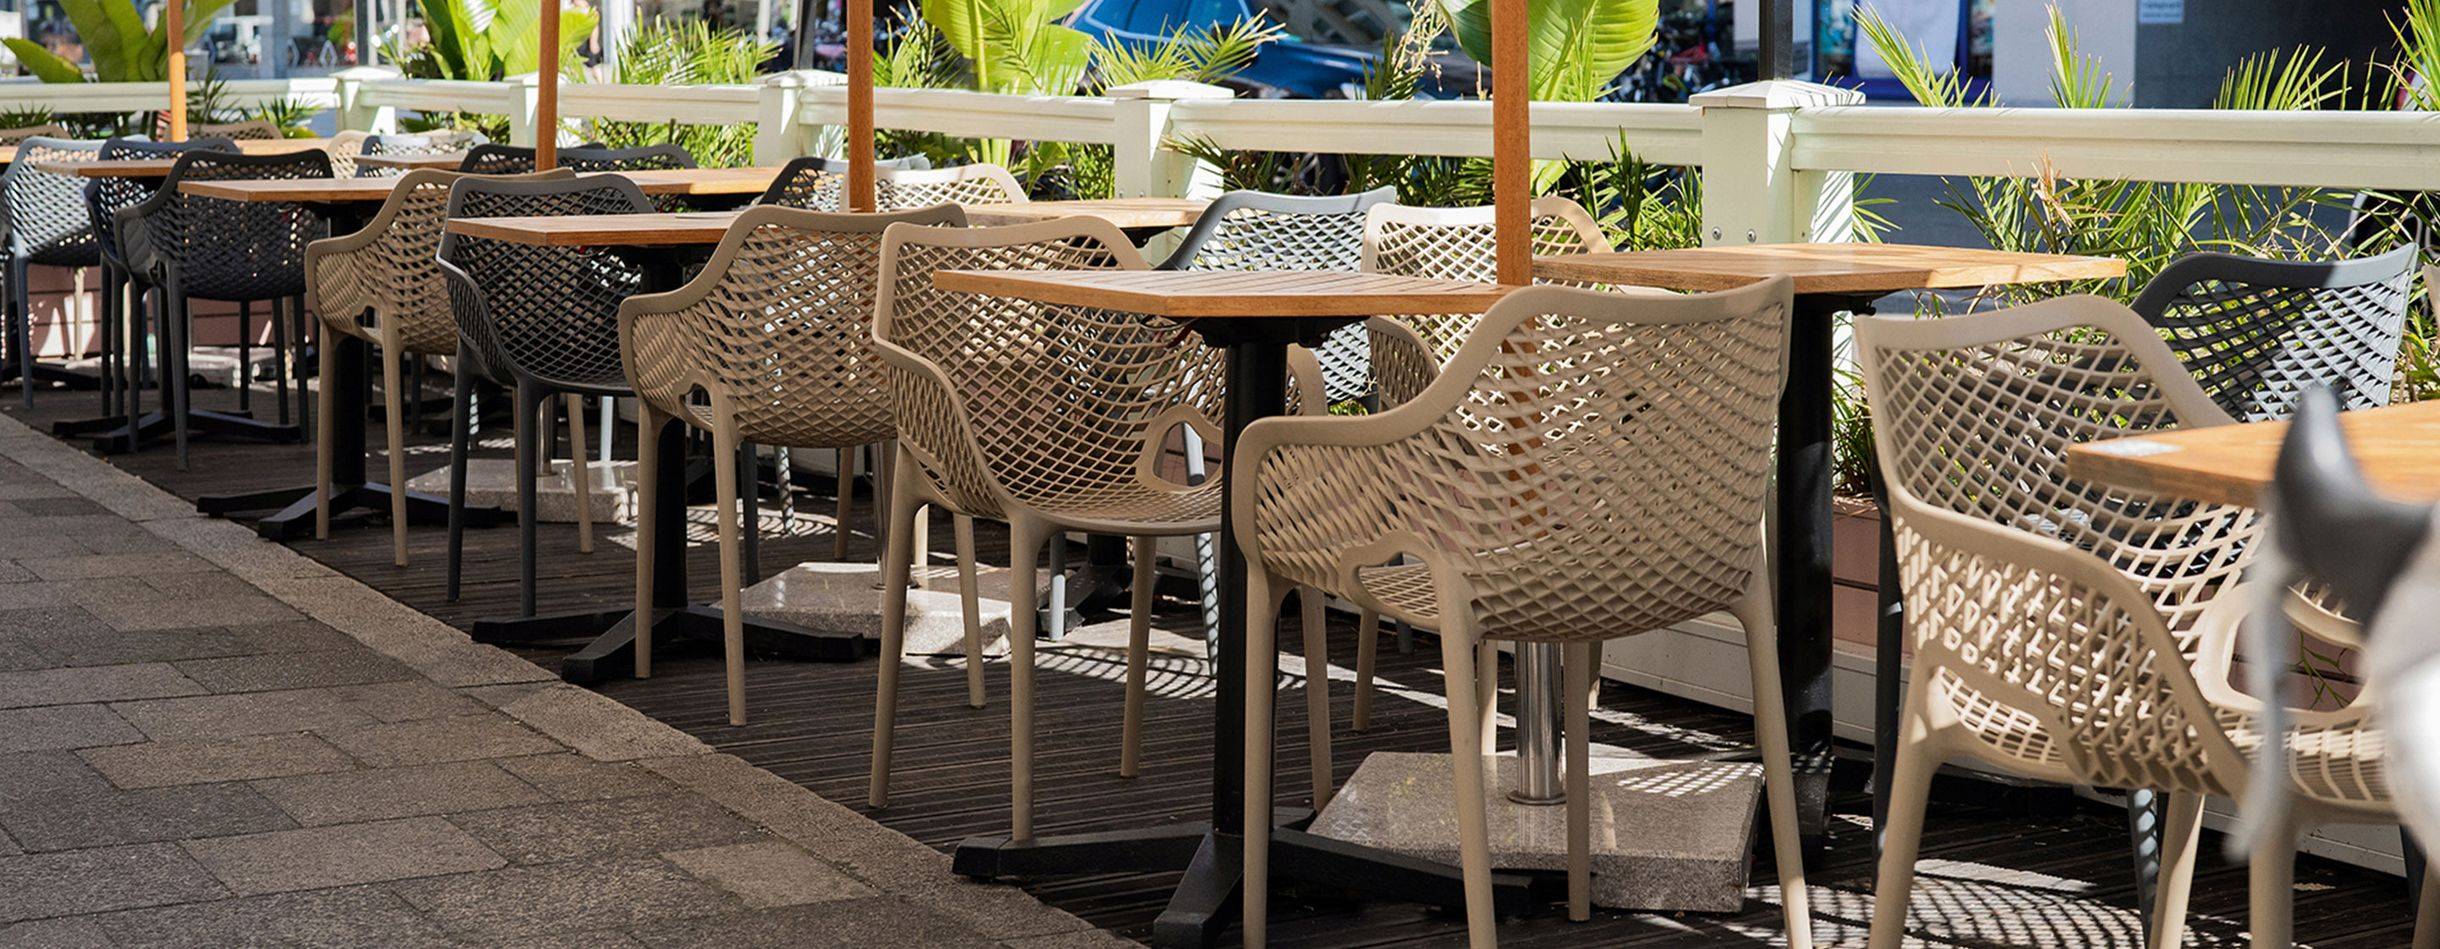 Terrace furniture for gastronomy